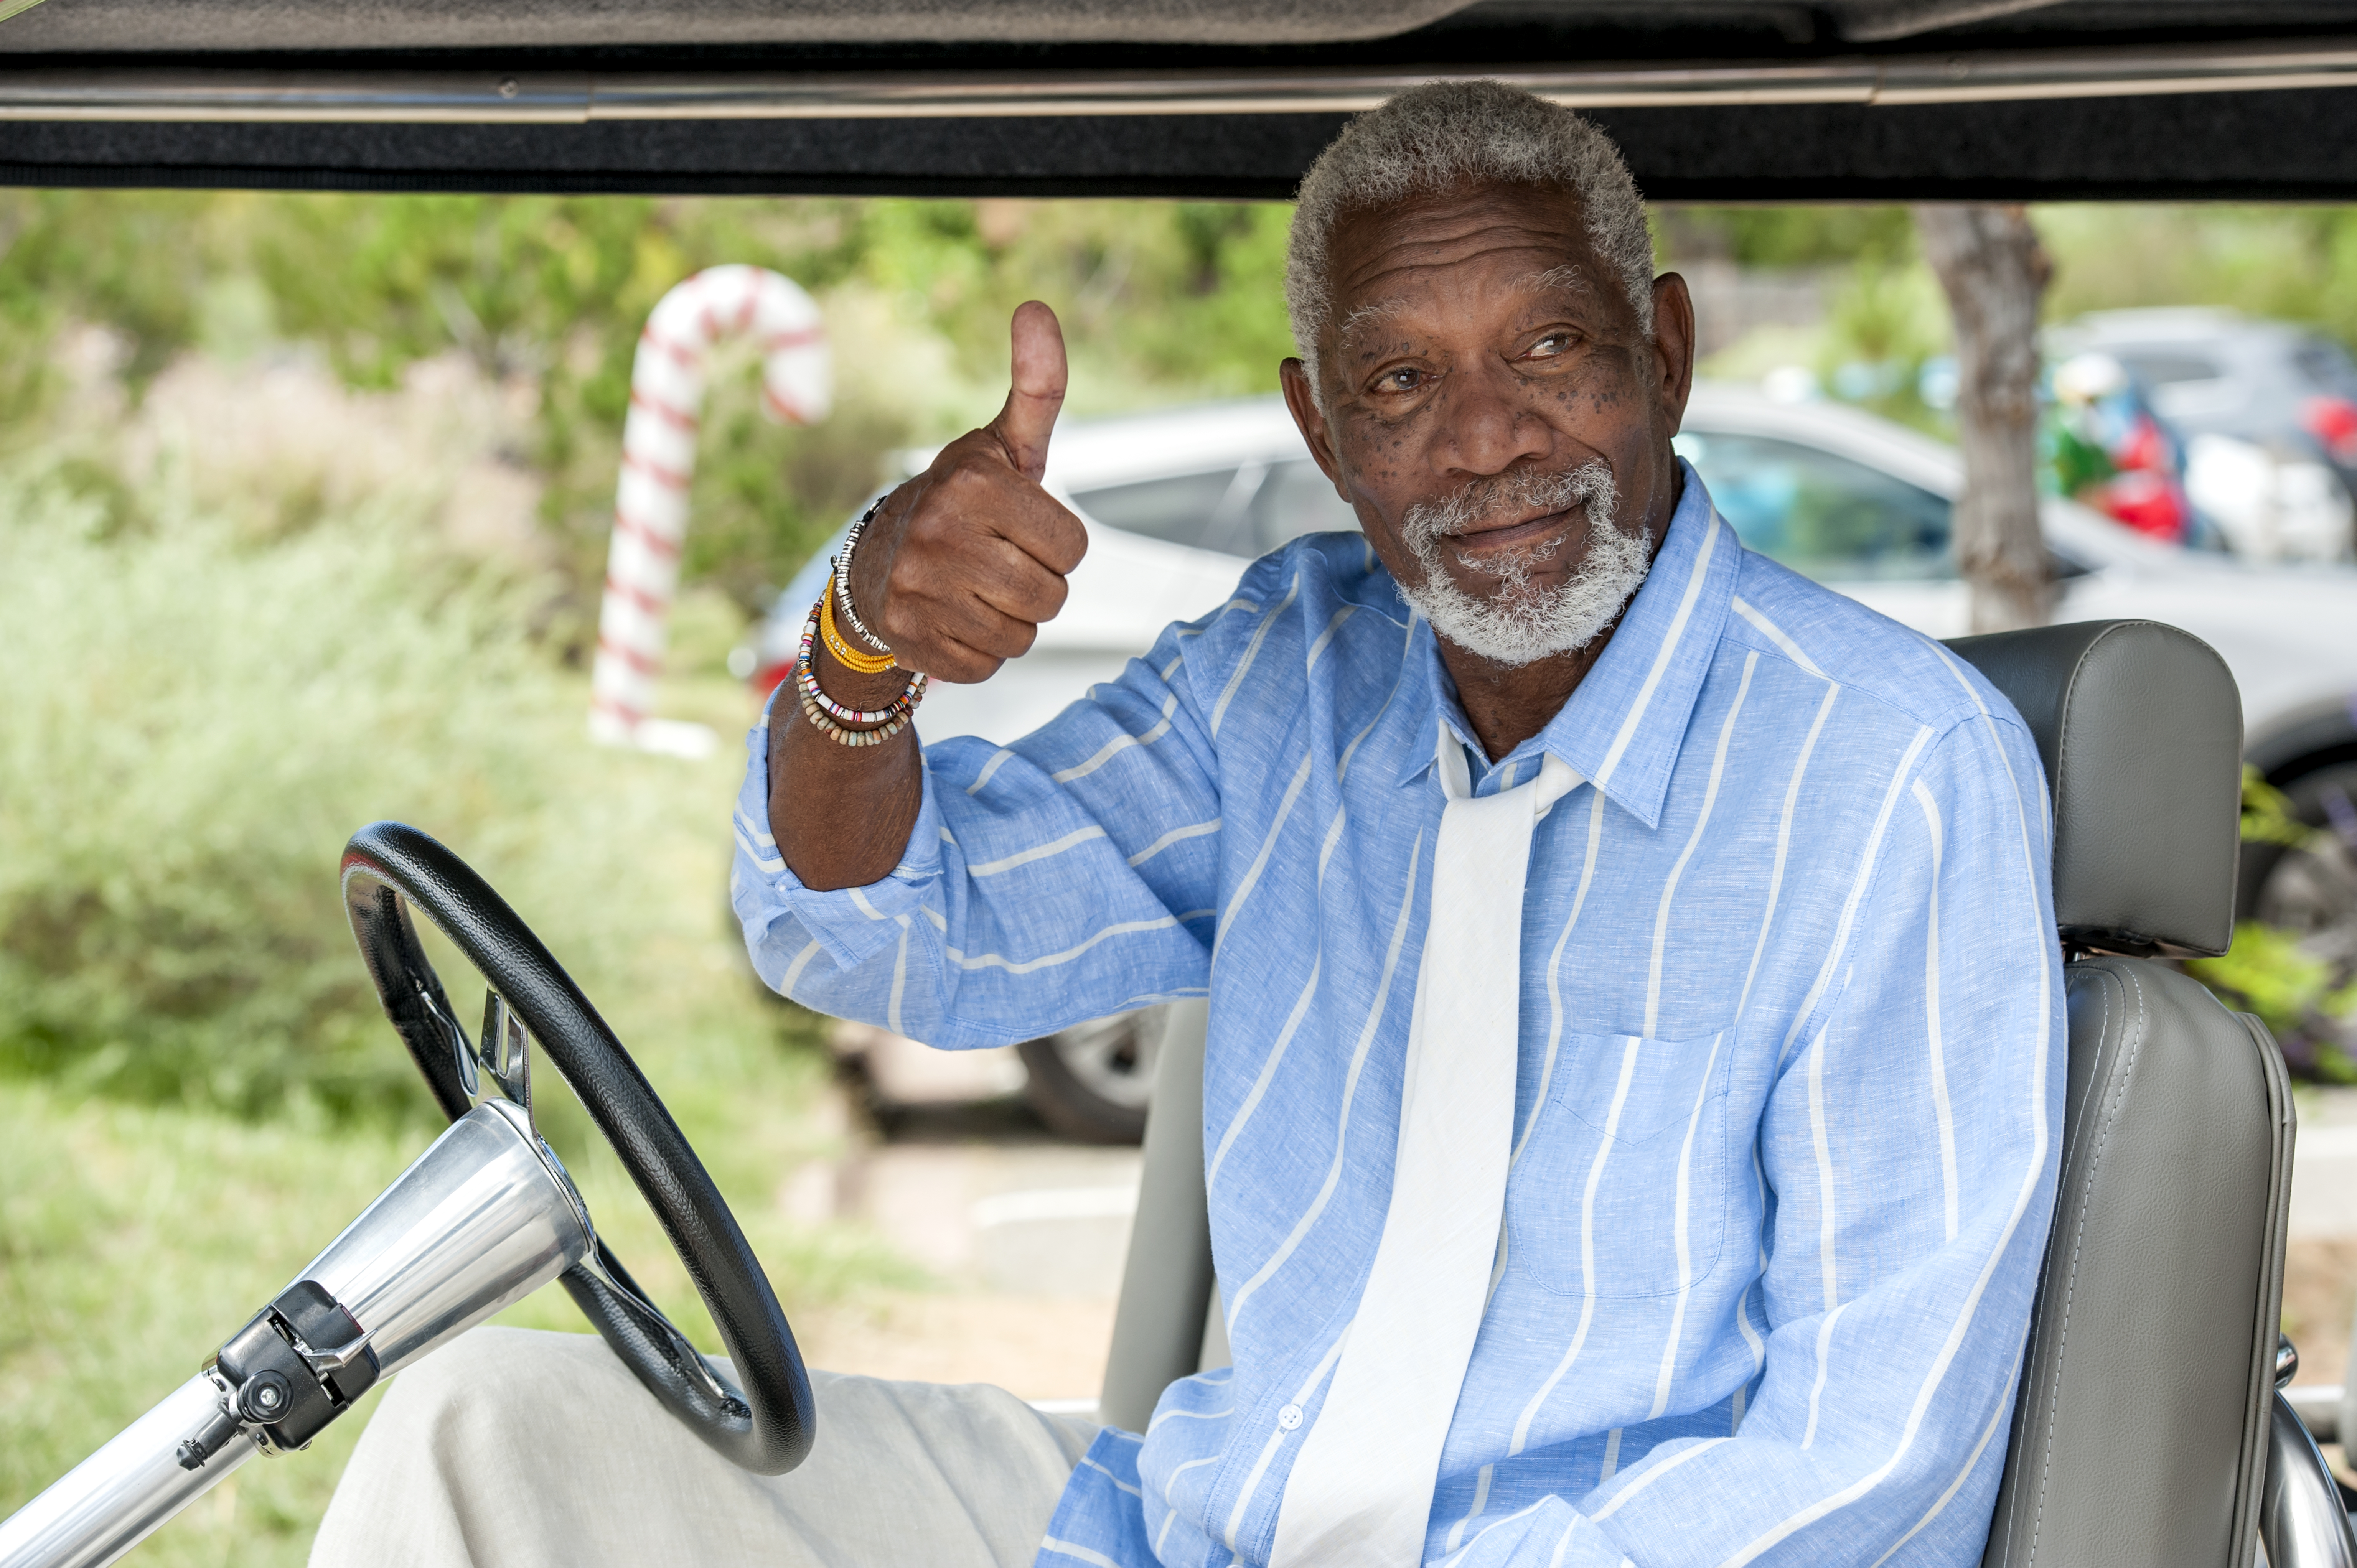 Just Getting Started Movie starring Morgan Freeman, Tommy Lee Jones, and  Rene Russo